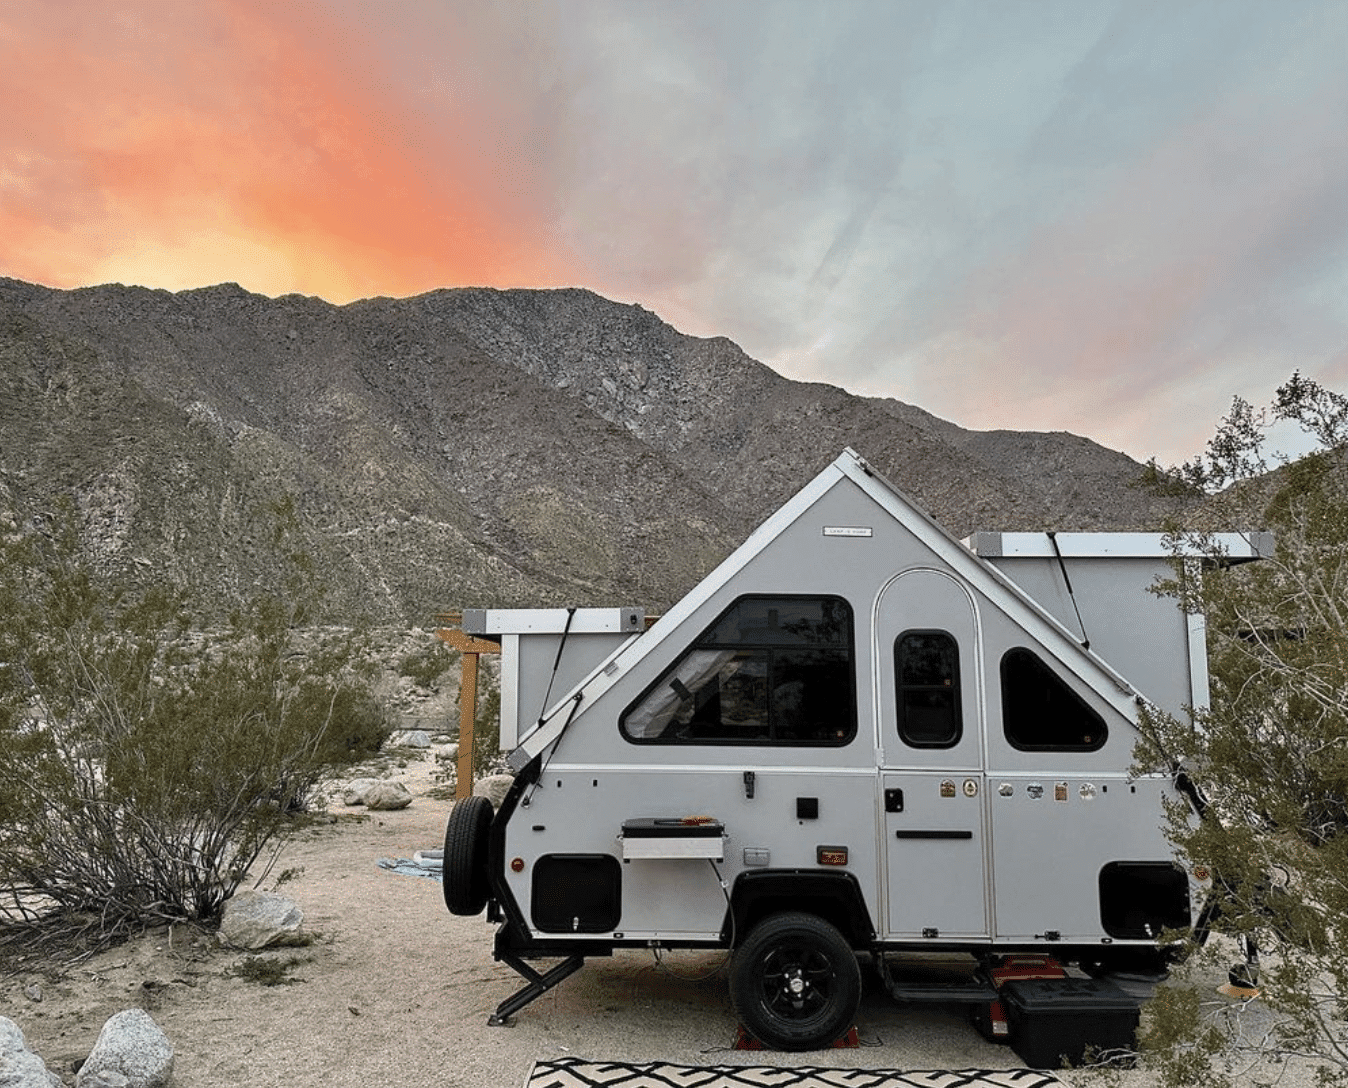 A white camper trailer parked in the desert.